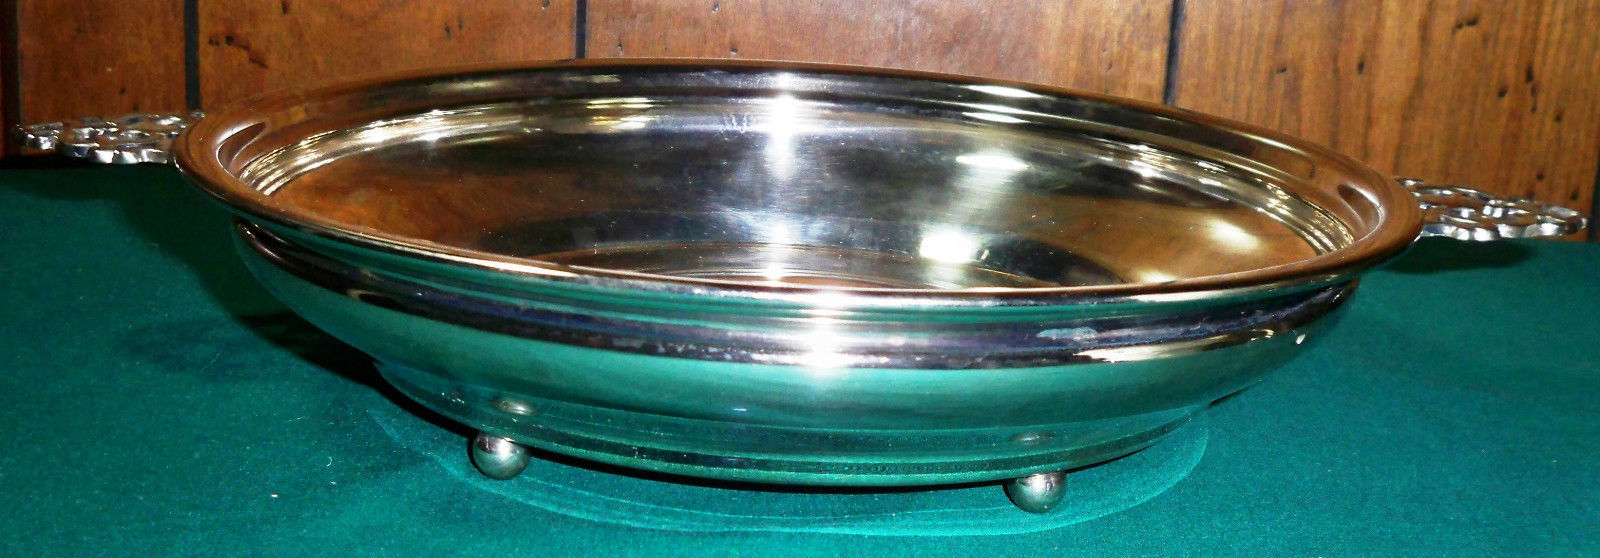 Primary image for Vintage English Silver Mfg Corp Silverplate Footed Serving Bowl